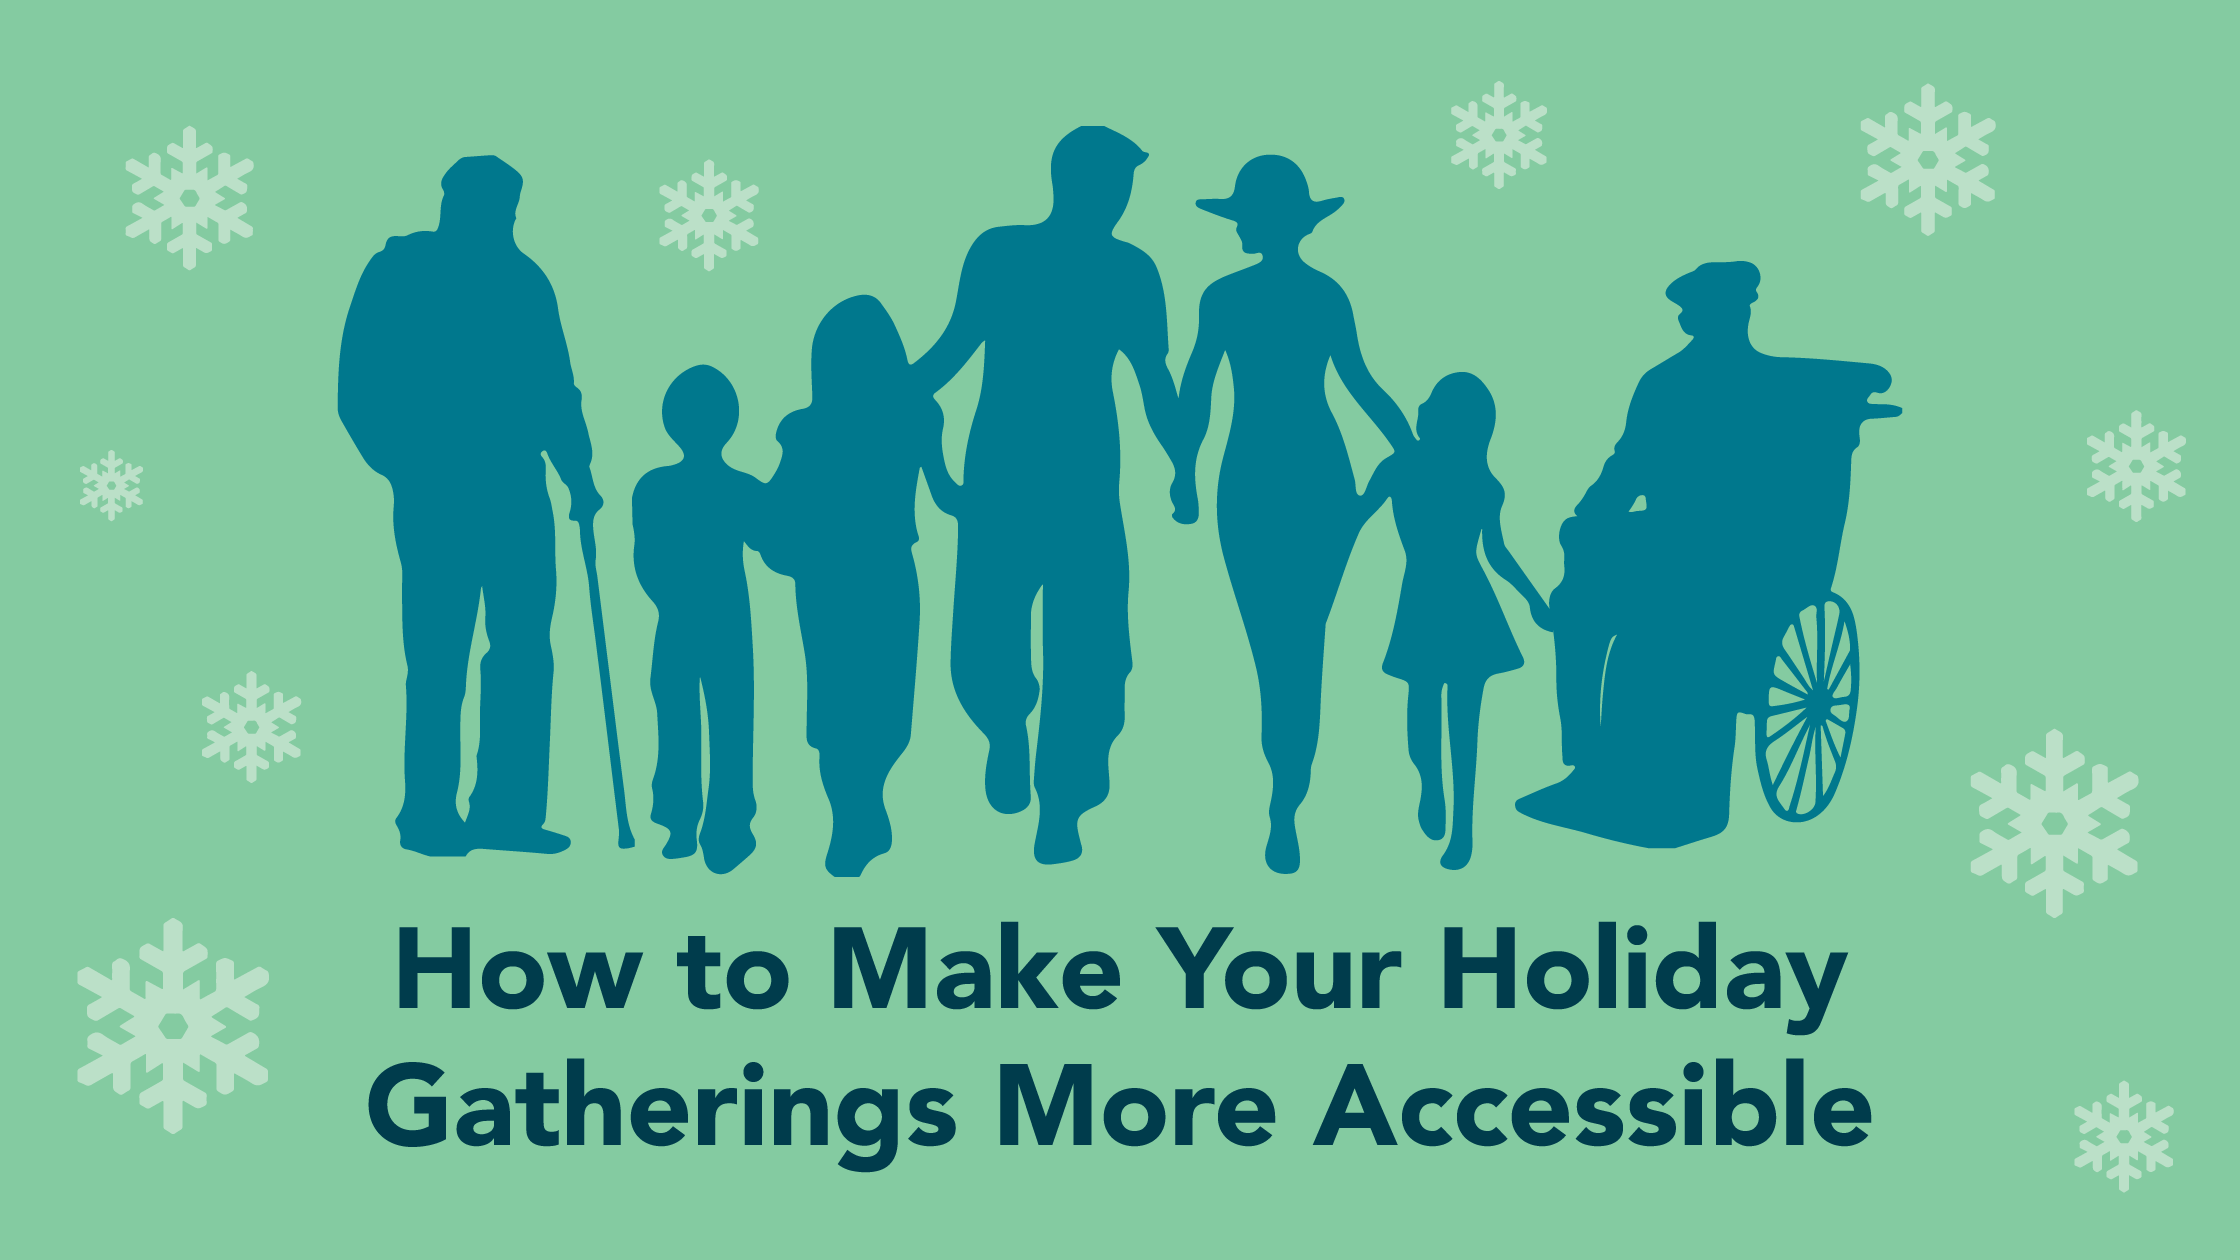 How to Make Your Holiday Gatherings More Accessible